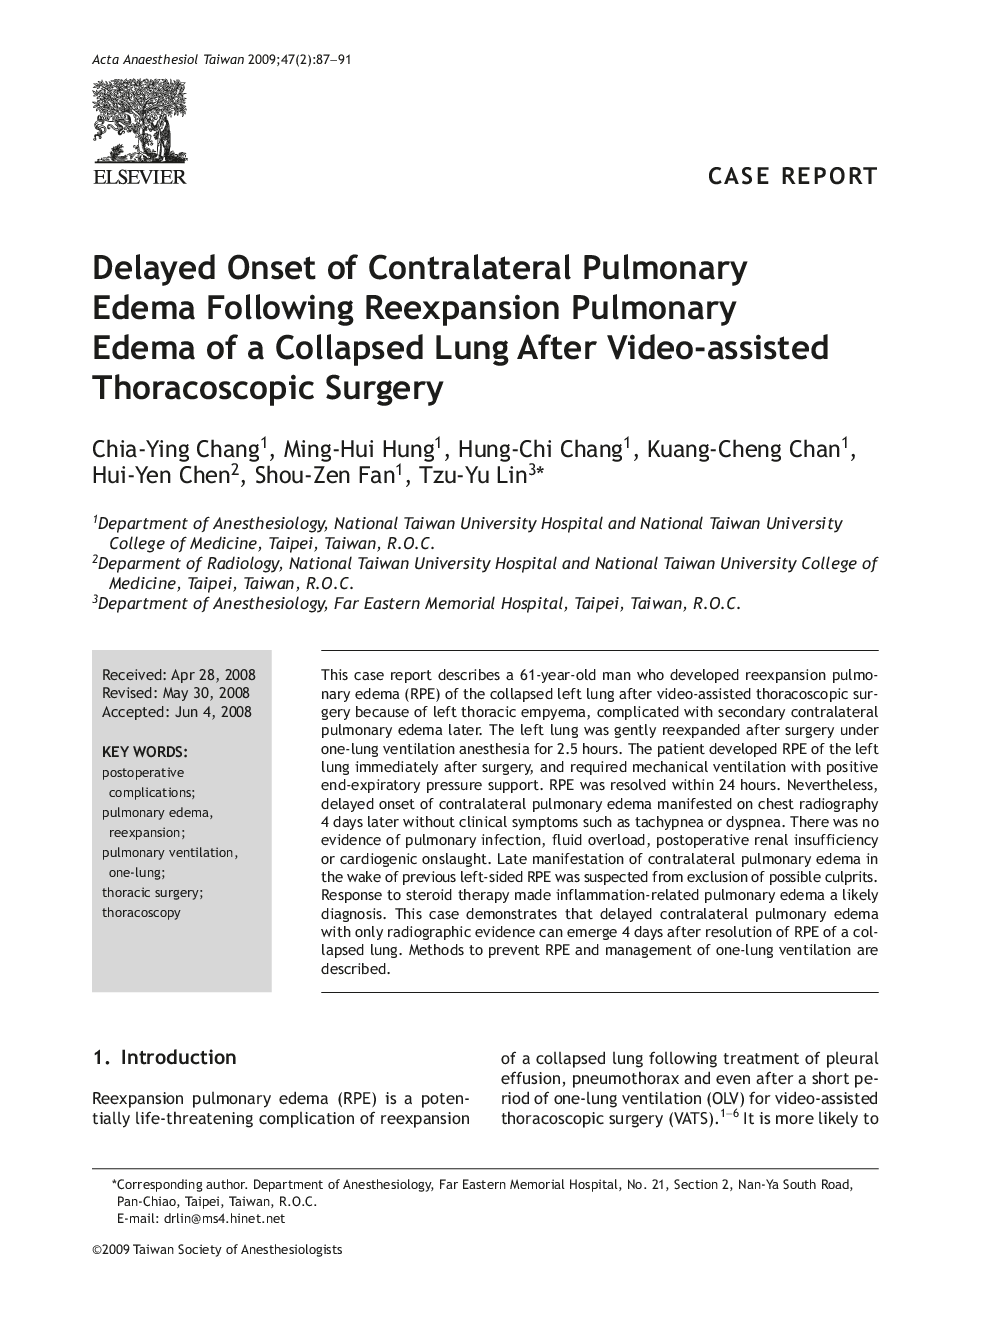 Delayed Onset of Contralateral Pulmonary Edema Following Reexpansion Pulmonary Edema of a Collapsed Lung After Video-assisted Thoracoscopic Surgery